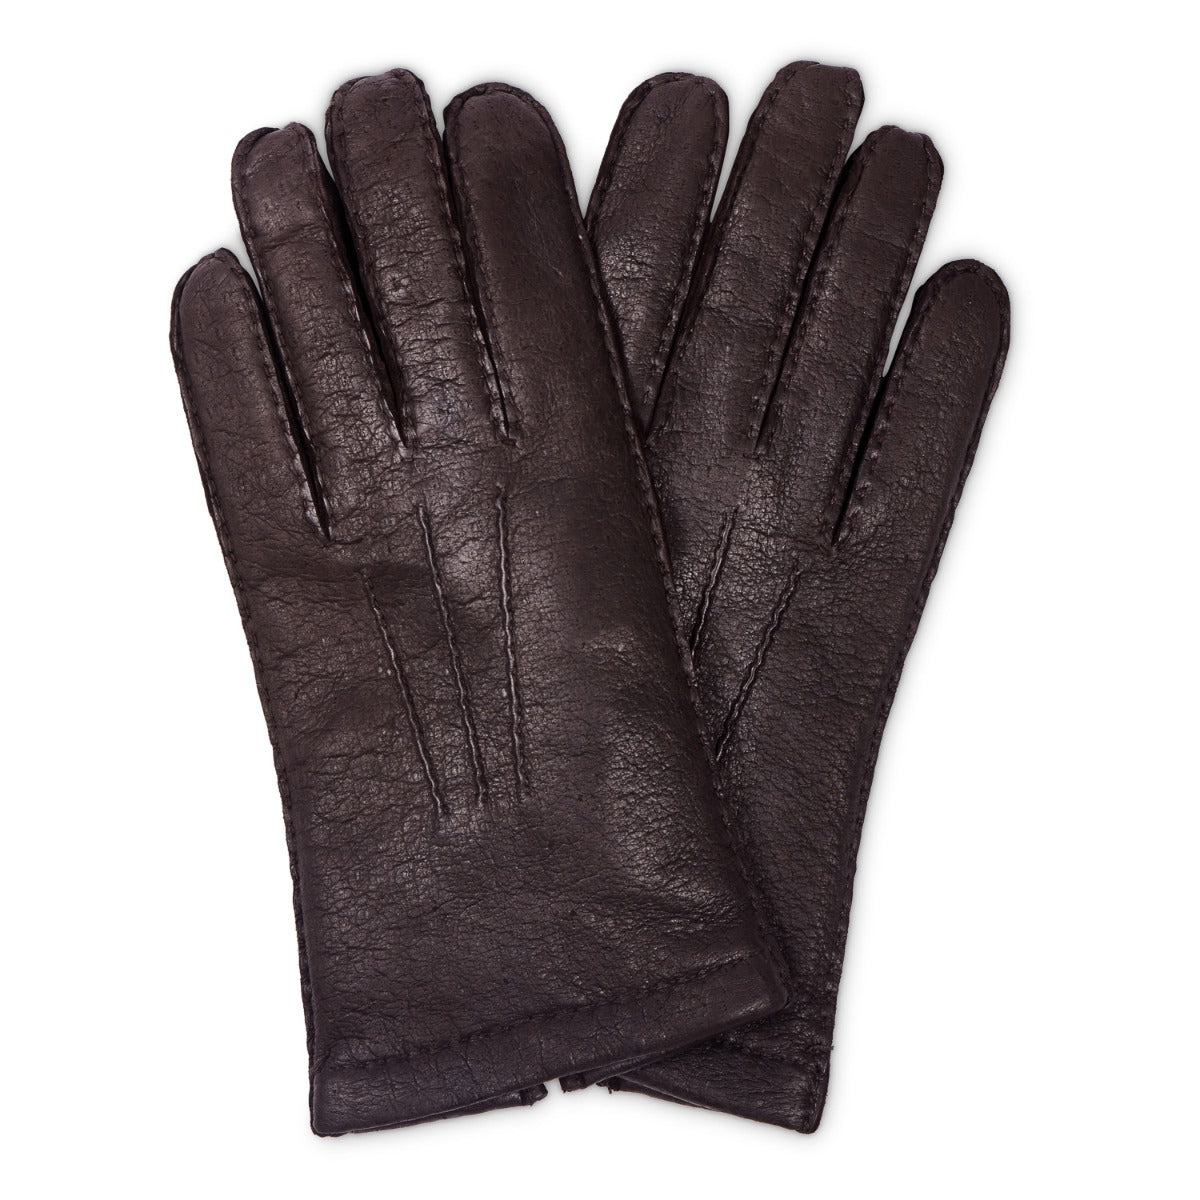 Sovereign Grade Dark Brown Peccary Leather Gloves, Unlined